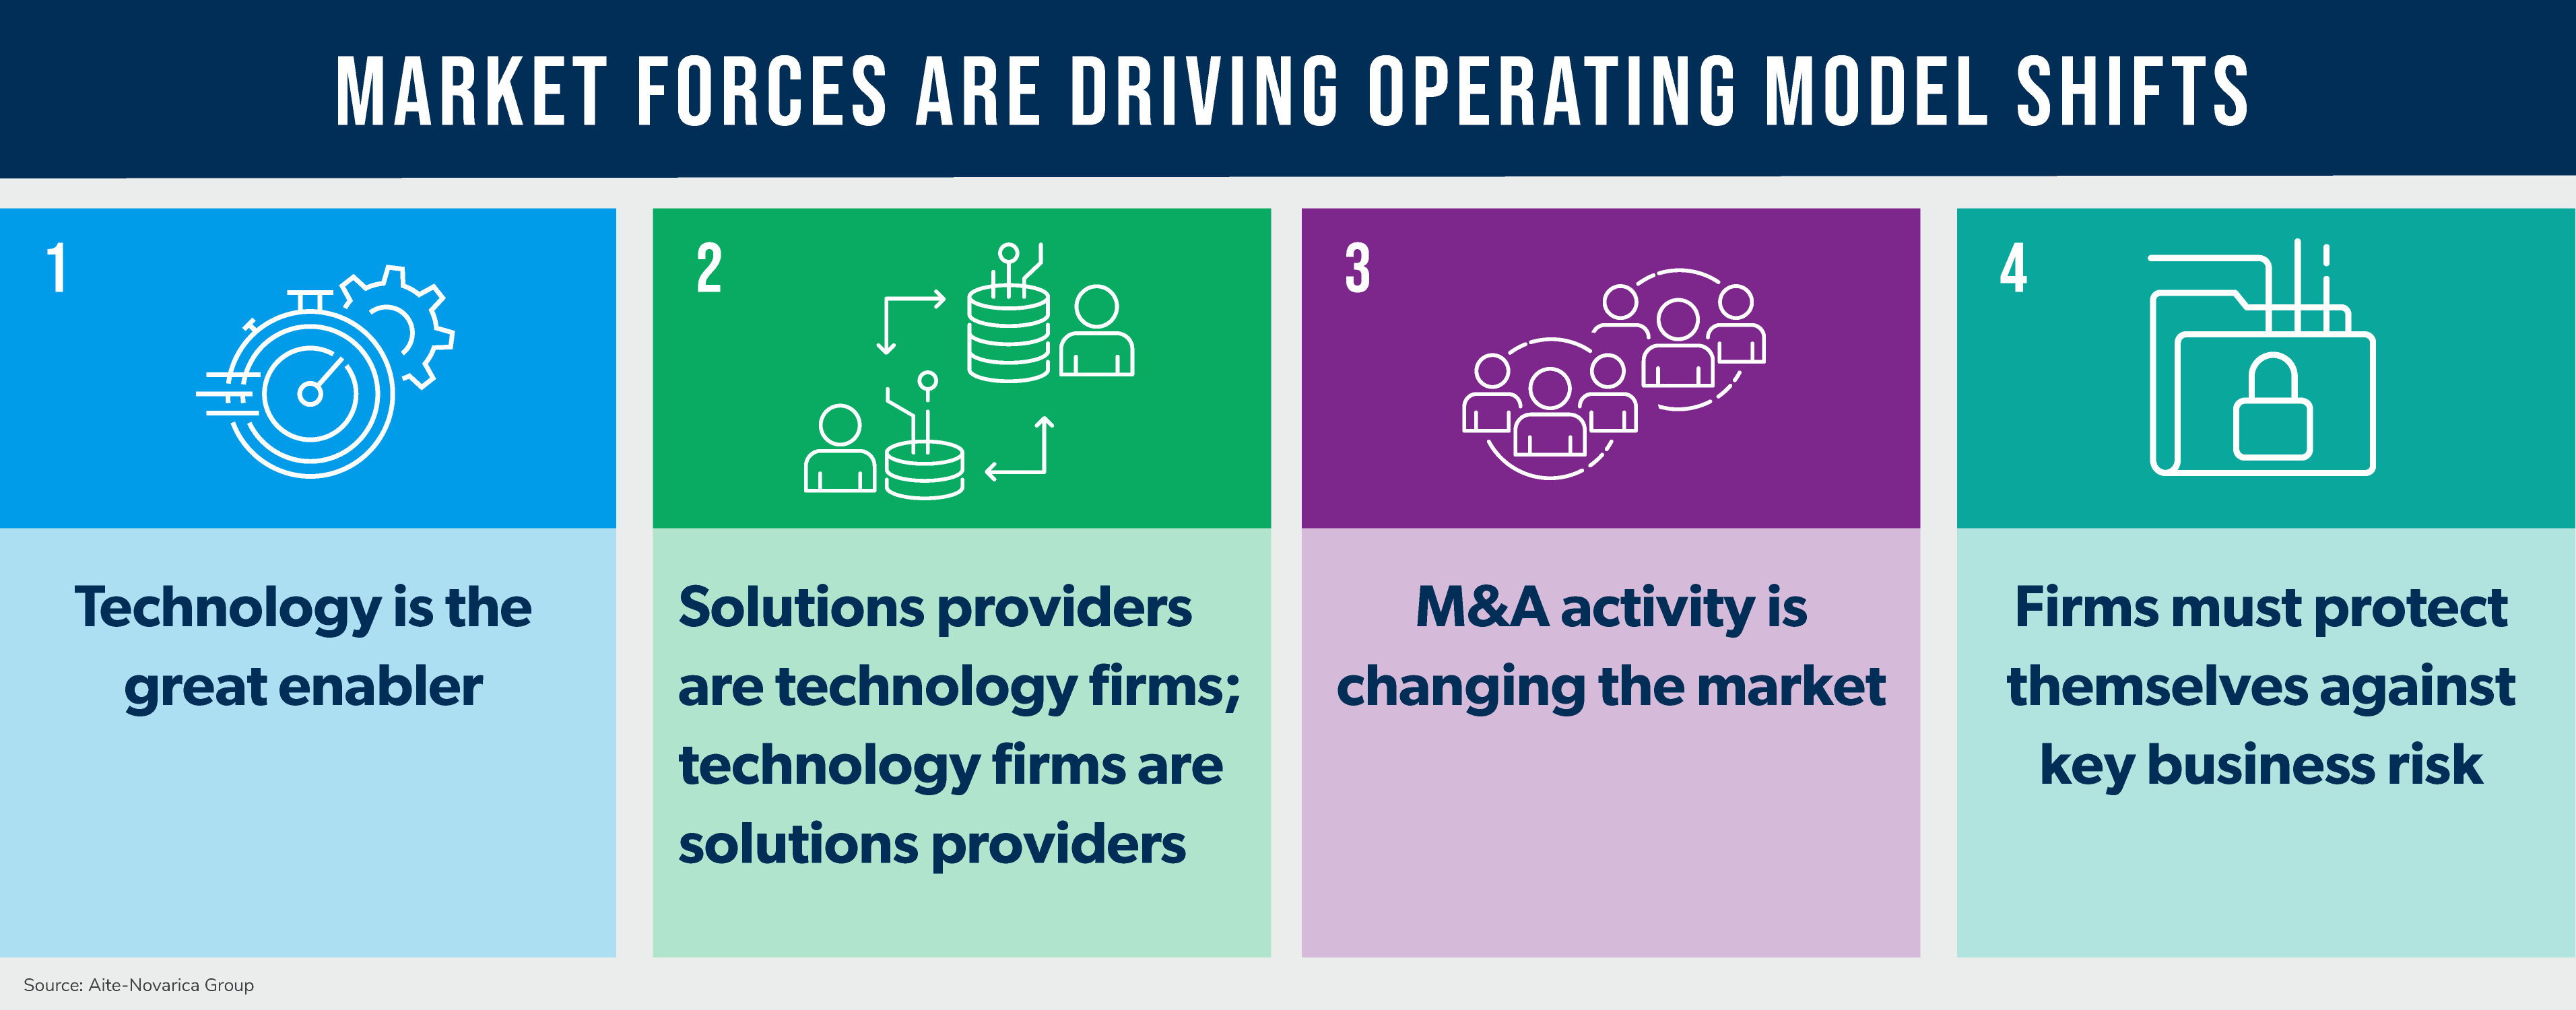 Market Forces Are Driving Operating Model Shifts